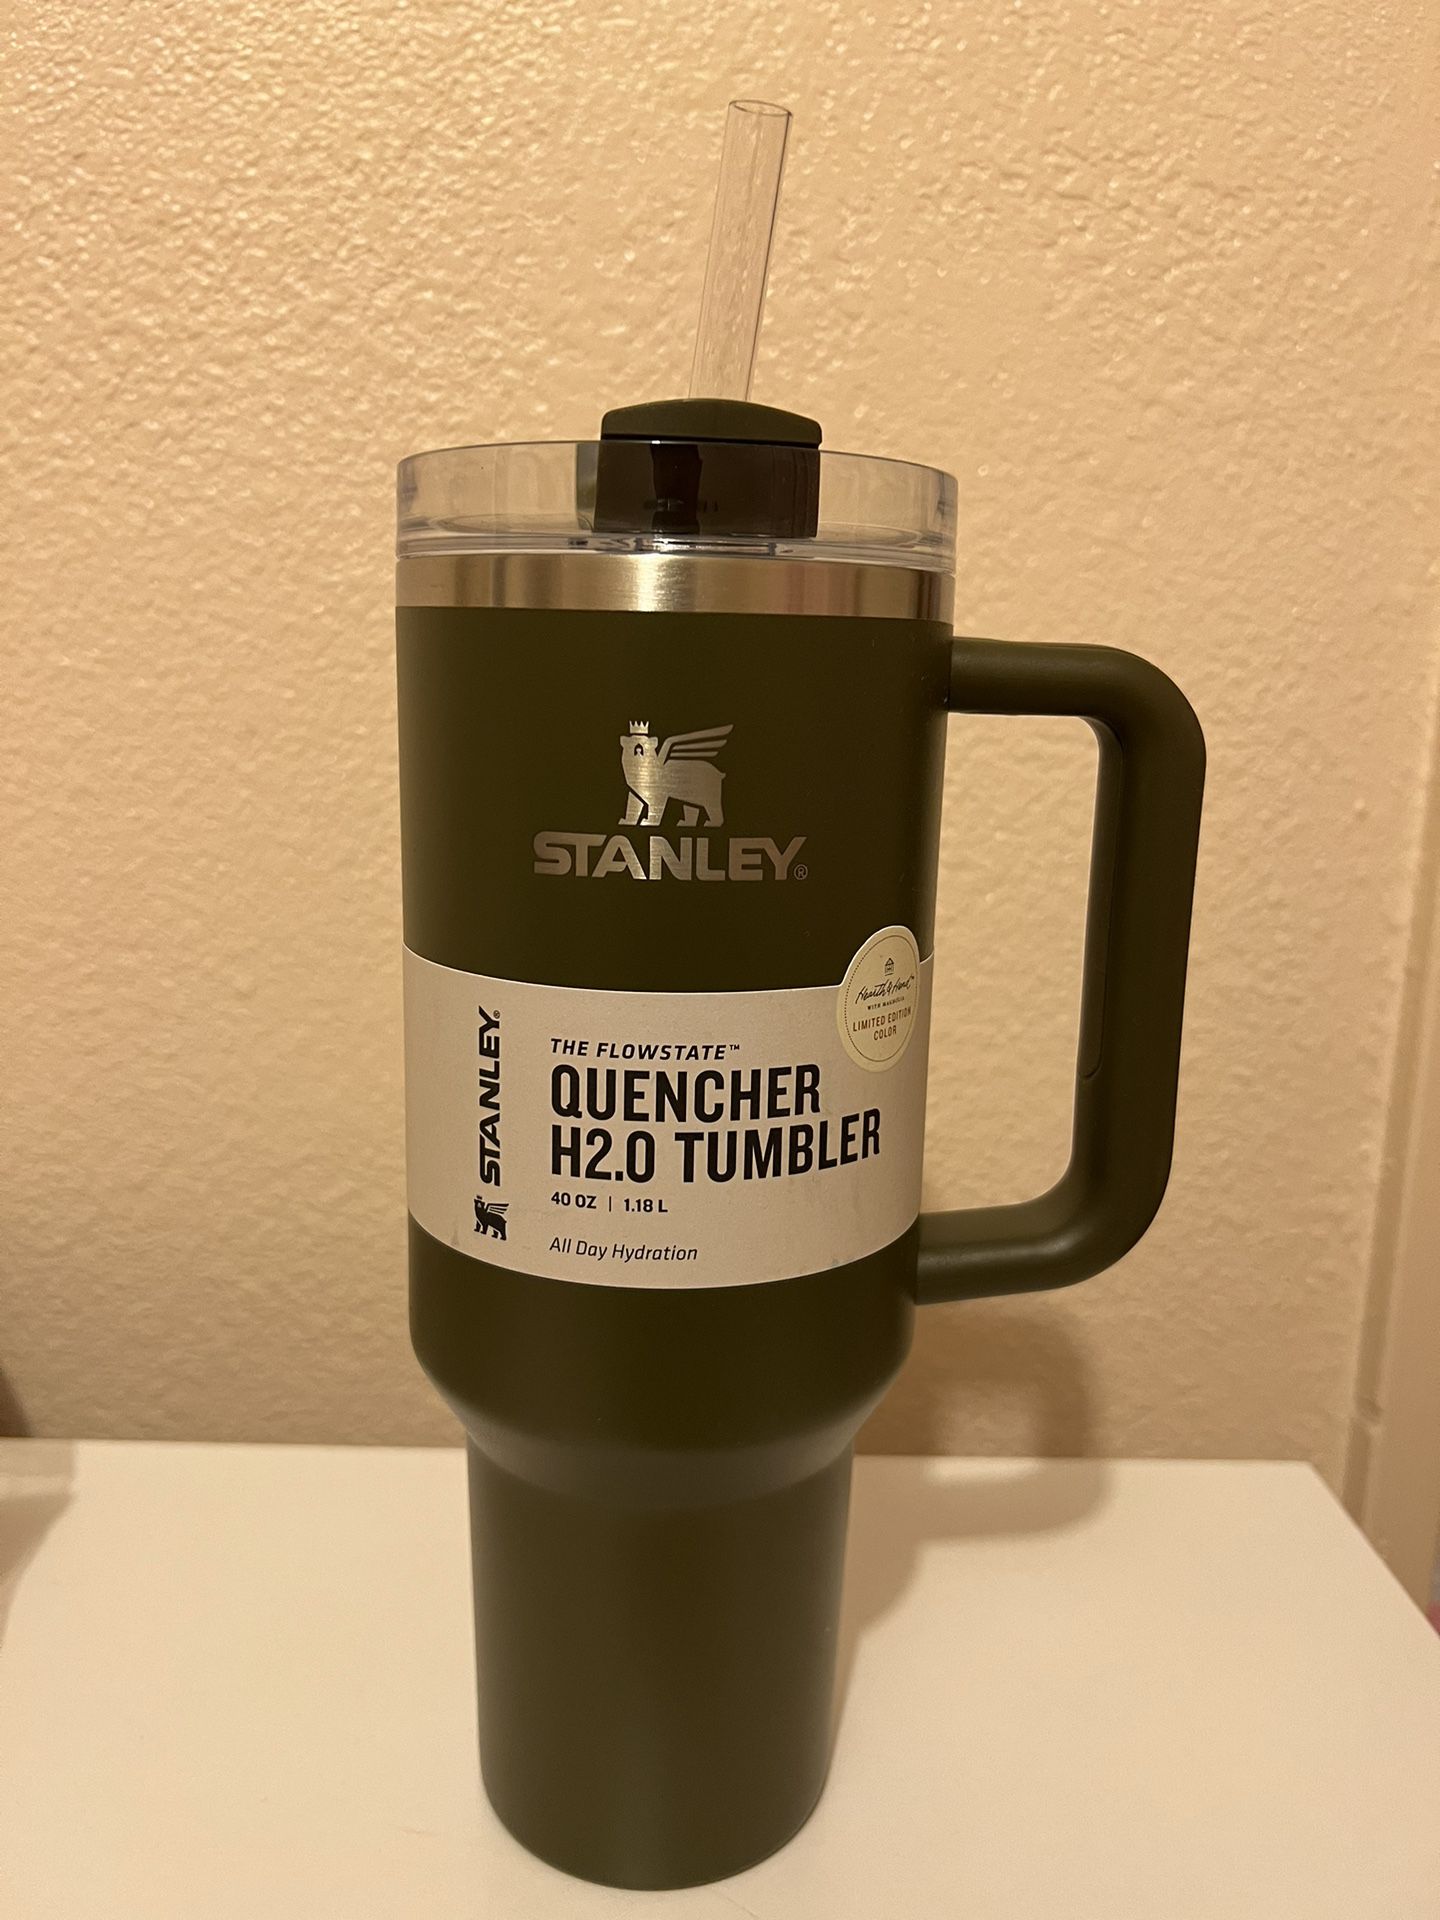 Stanley 40 oz. Quencher H2.0 FlowState Tumbler (Color: Twilight)